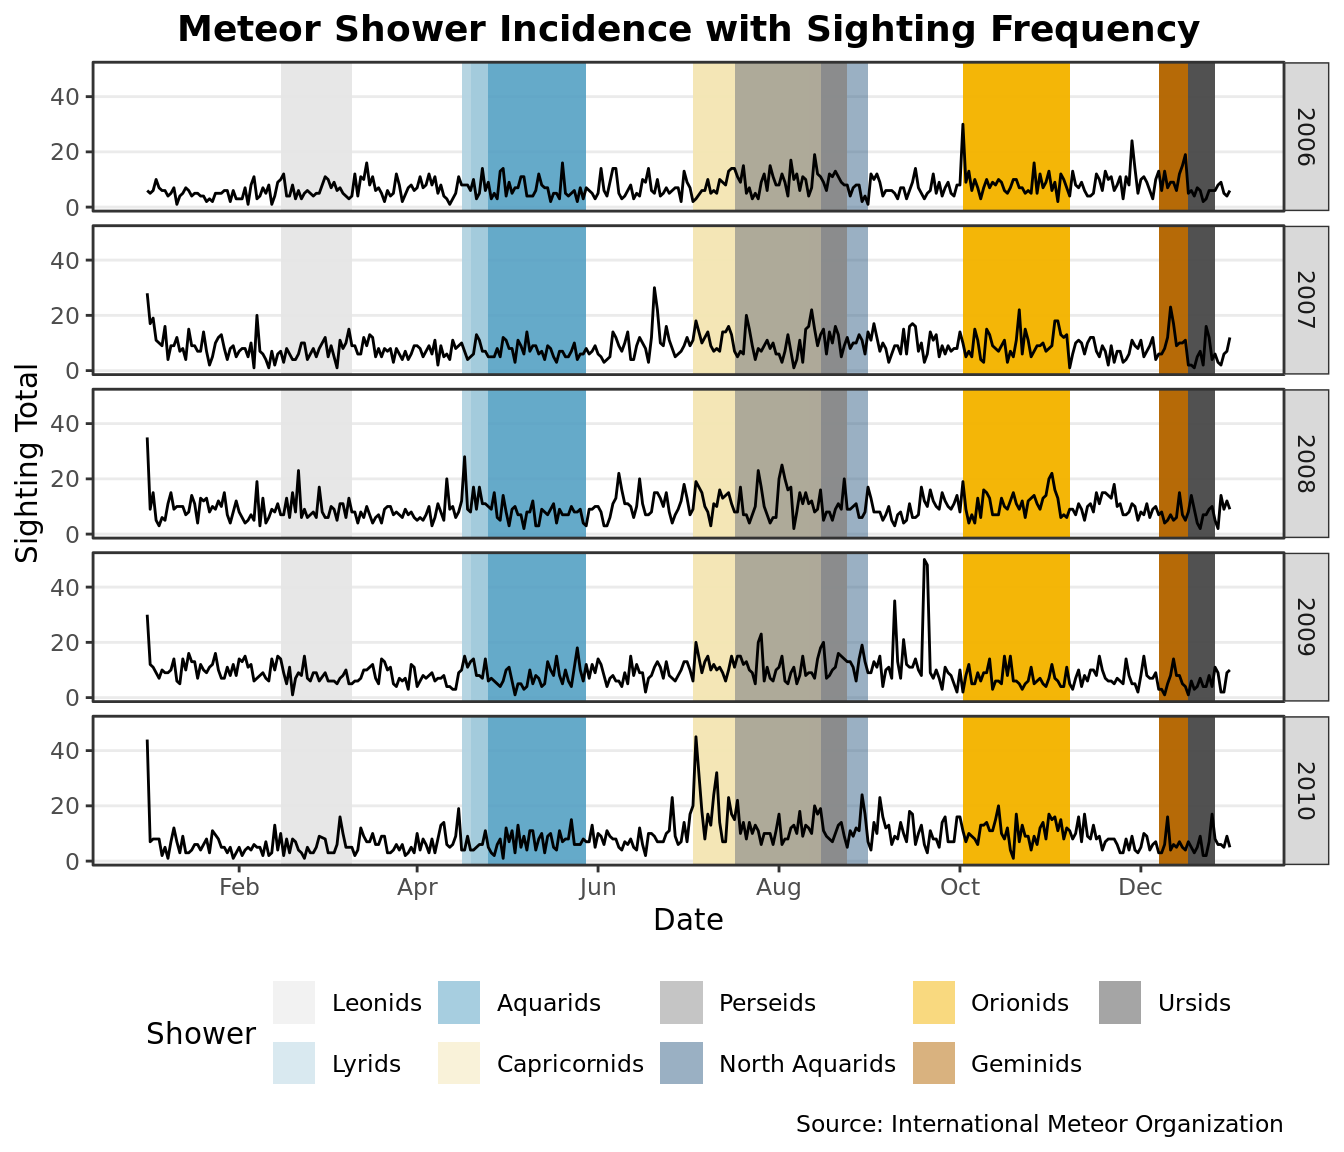 A time series plot showing the counts of UFO sightings and meteor showers aligned over multiple years. The plot consists of filled rectangles representing the duration of meteor showers, overlaid with a line plot depicting the count of UFO sightings over time. The x-axis represents months of the year, while the y-axis shows the count of sightings. Each panel represents a different year, allowing for comparison of sightings across years.